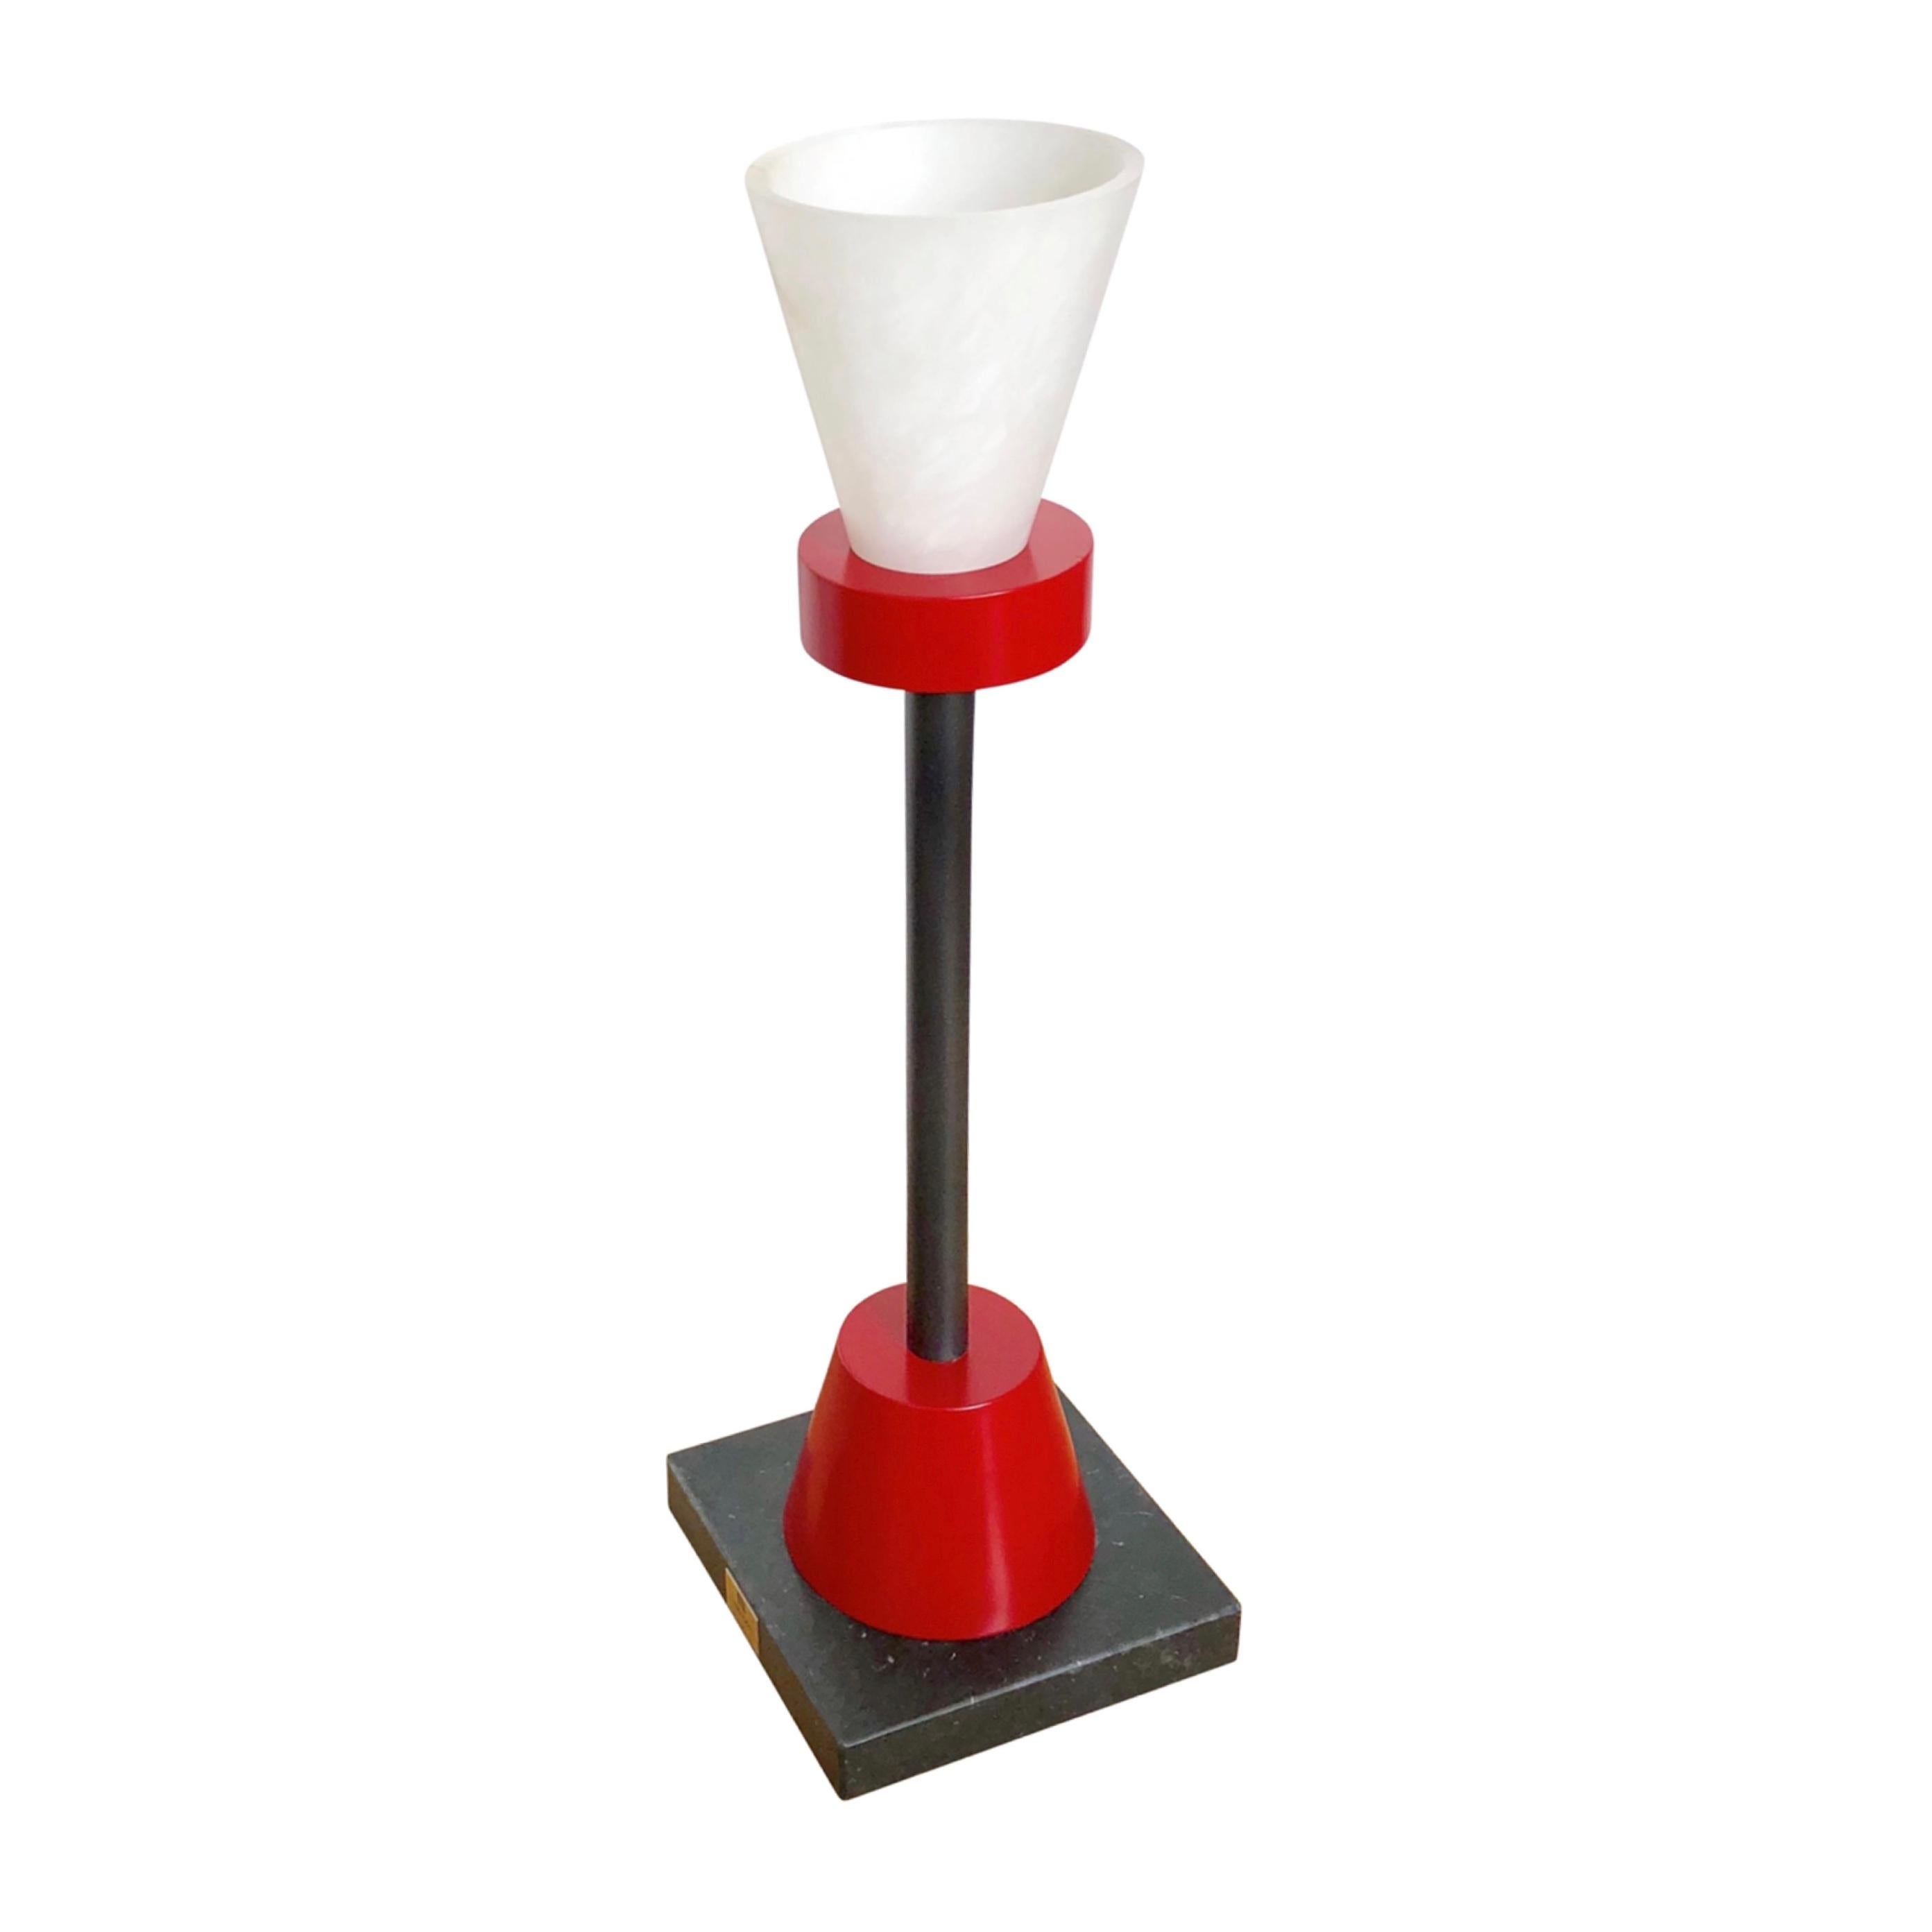 Post-Modern Ettore Sottsass (1917-2007) Lampe Luce Bassa 1988 Bharata collection For Sale